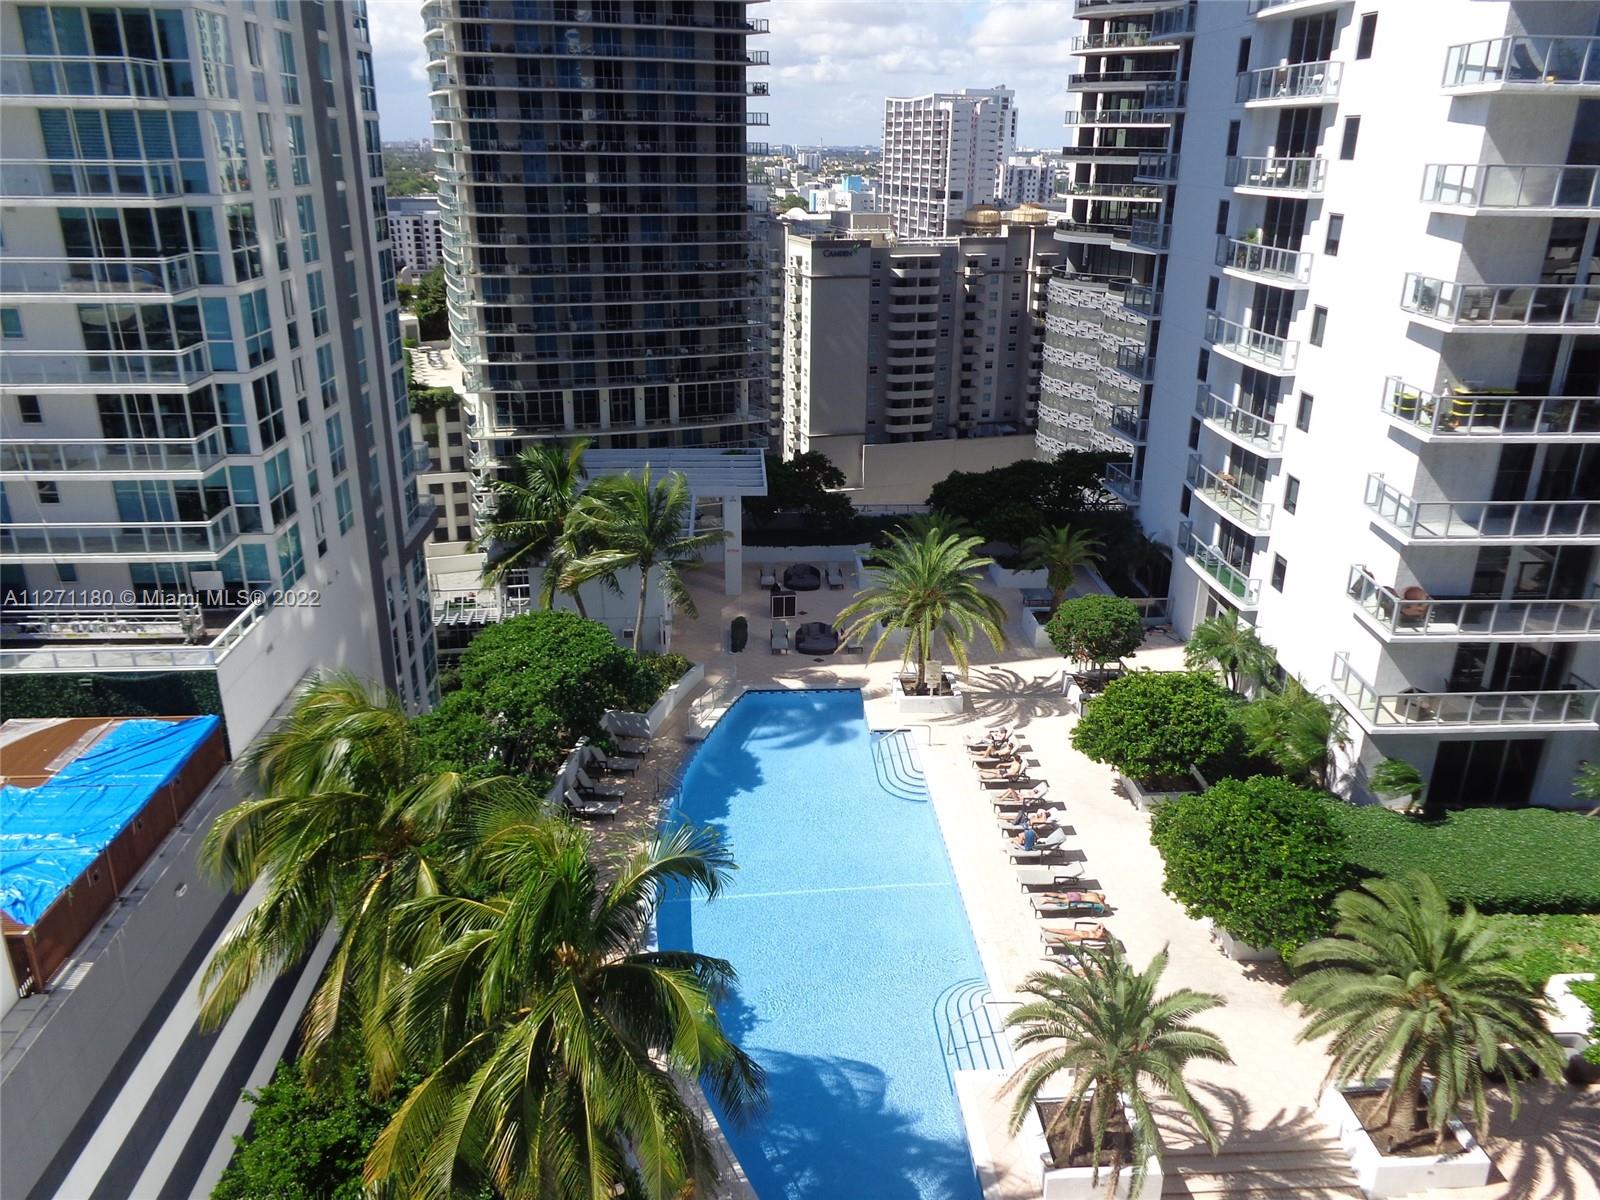 Great 2/2 corner unit with marble floors throughout, Italian style kitchen with granite counter tops, ss appliances, roller shades.  Modern building with all amenities: pool, gym yoga, virtual golf room, wine & cigar room, 24 hours concierge, premier location within walking distance to Brickell City Centre, Mary Brickell Village, Financial District, People mover, restaurants, etc.